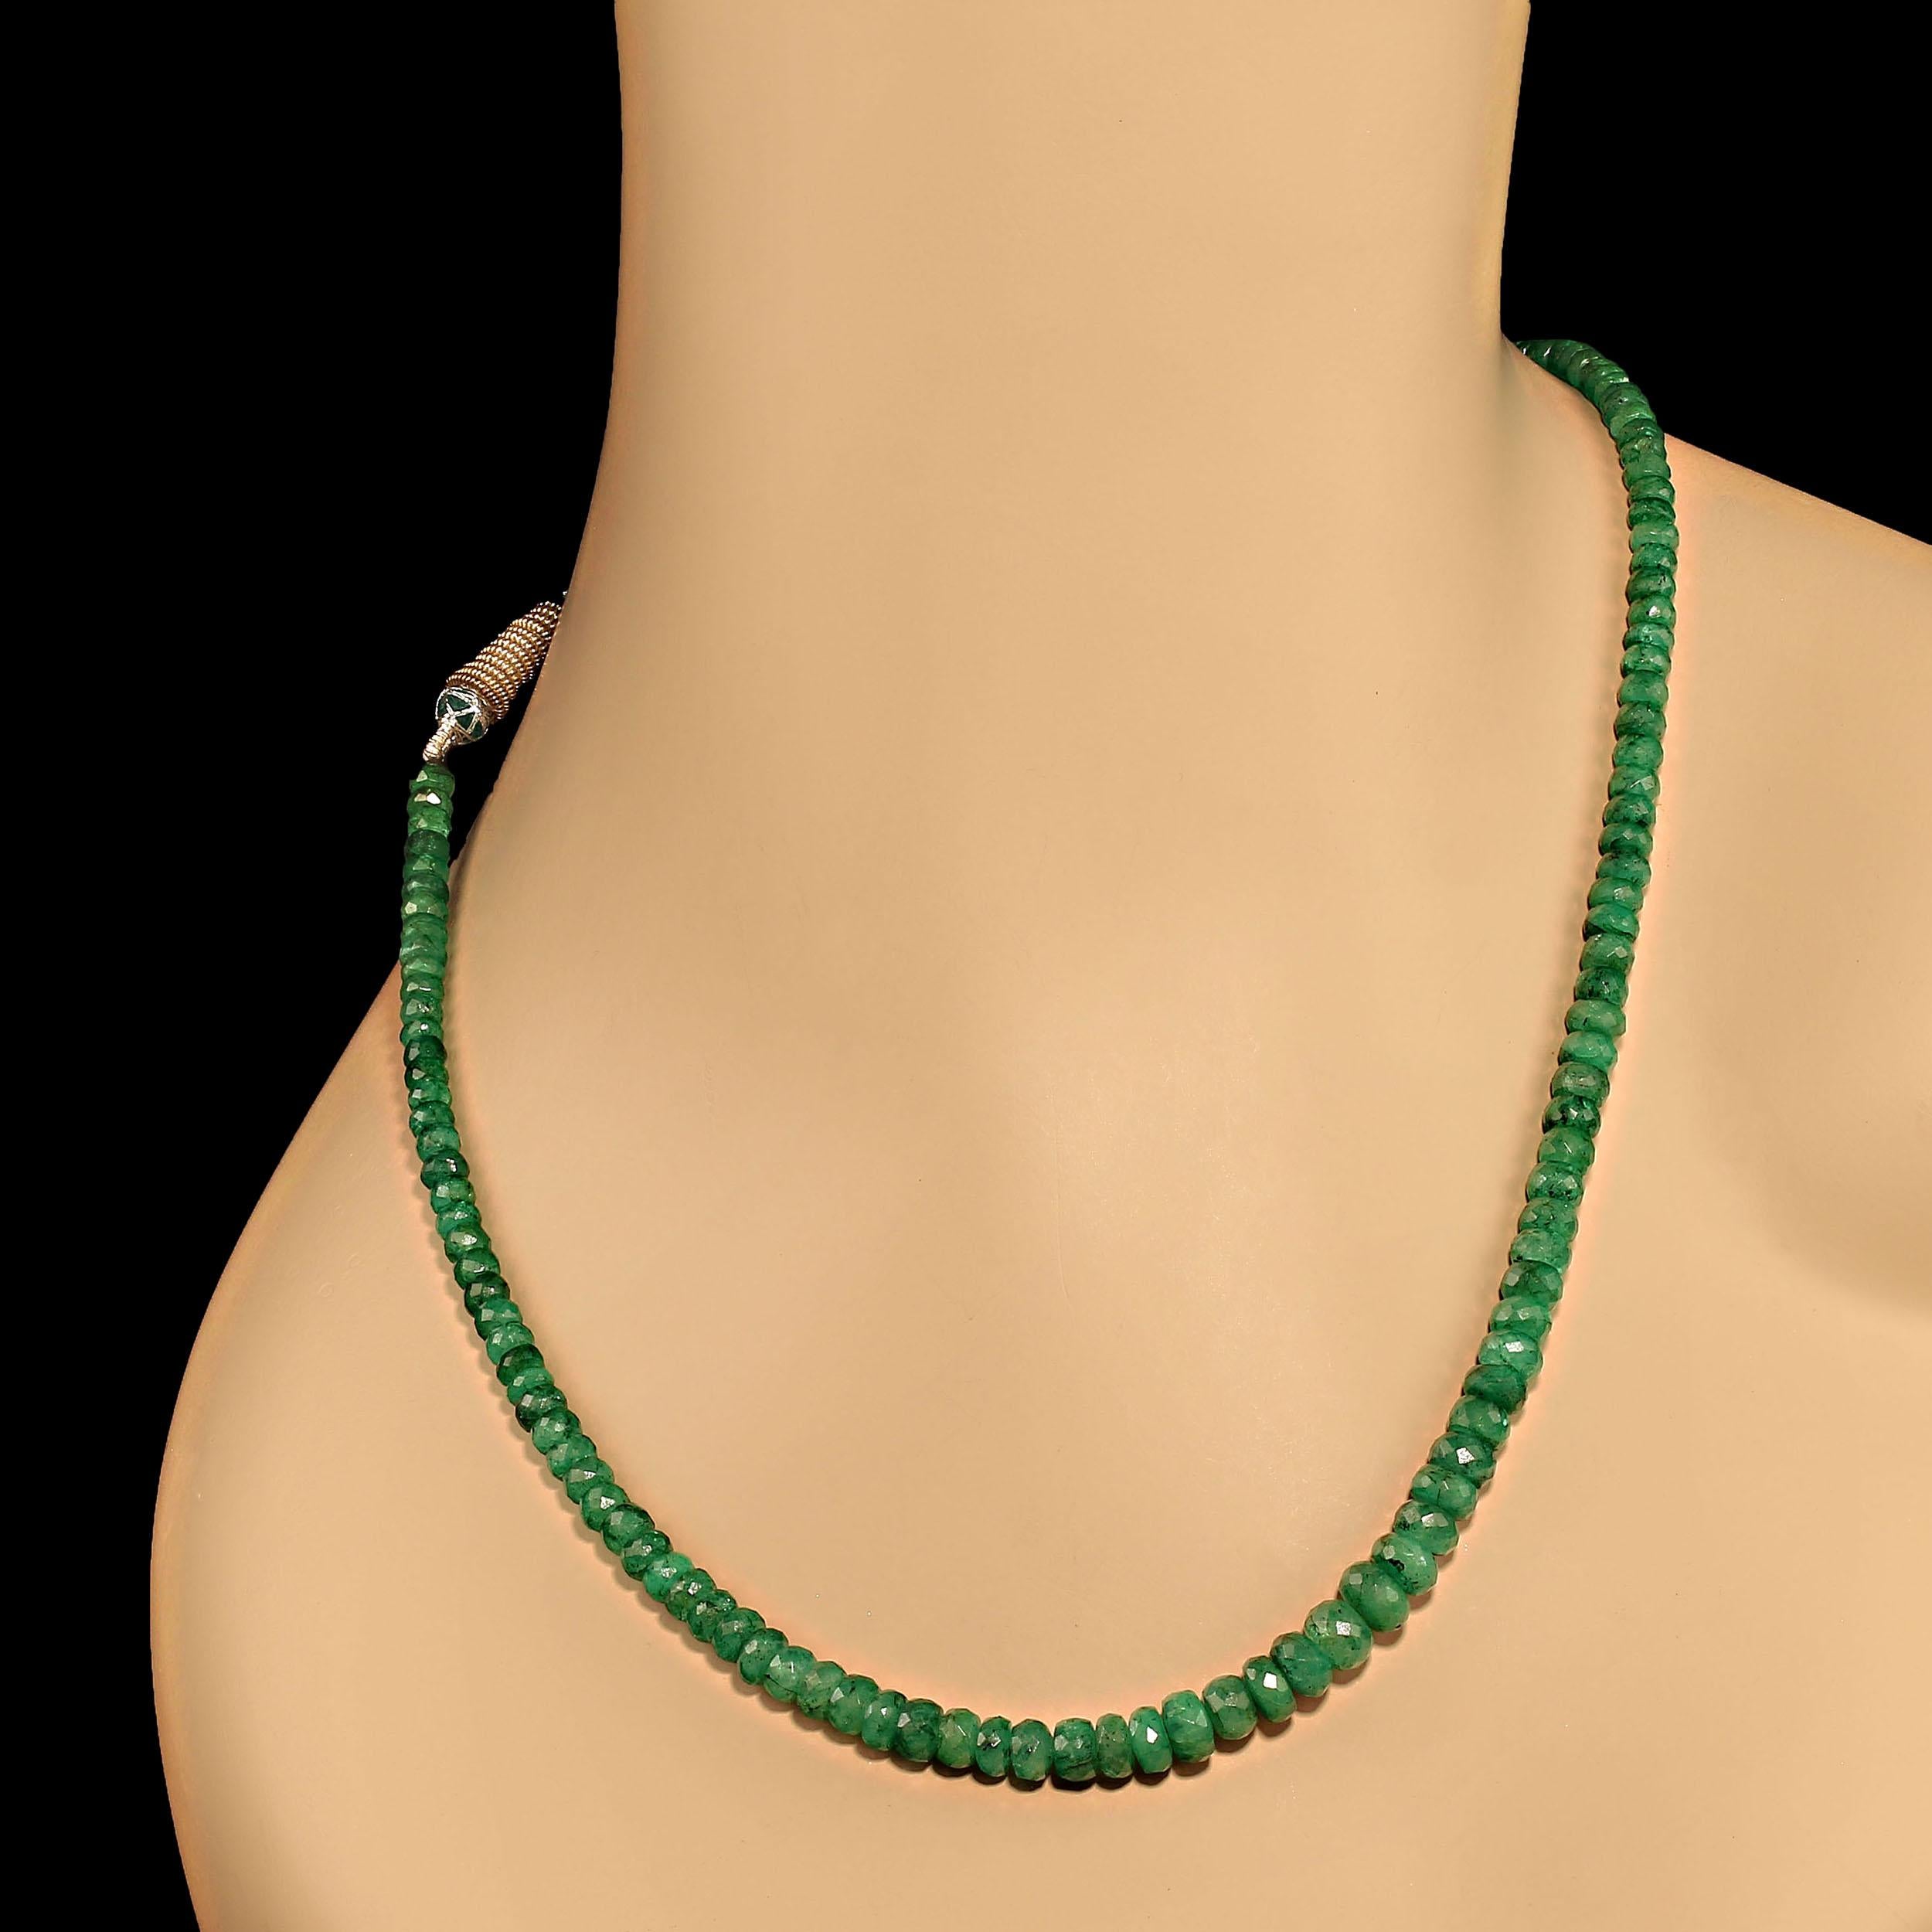 15 inches necklace